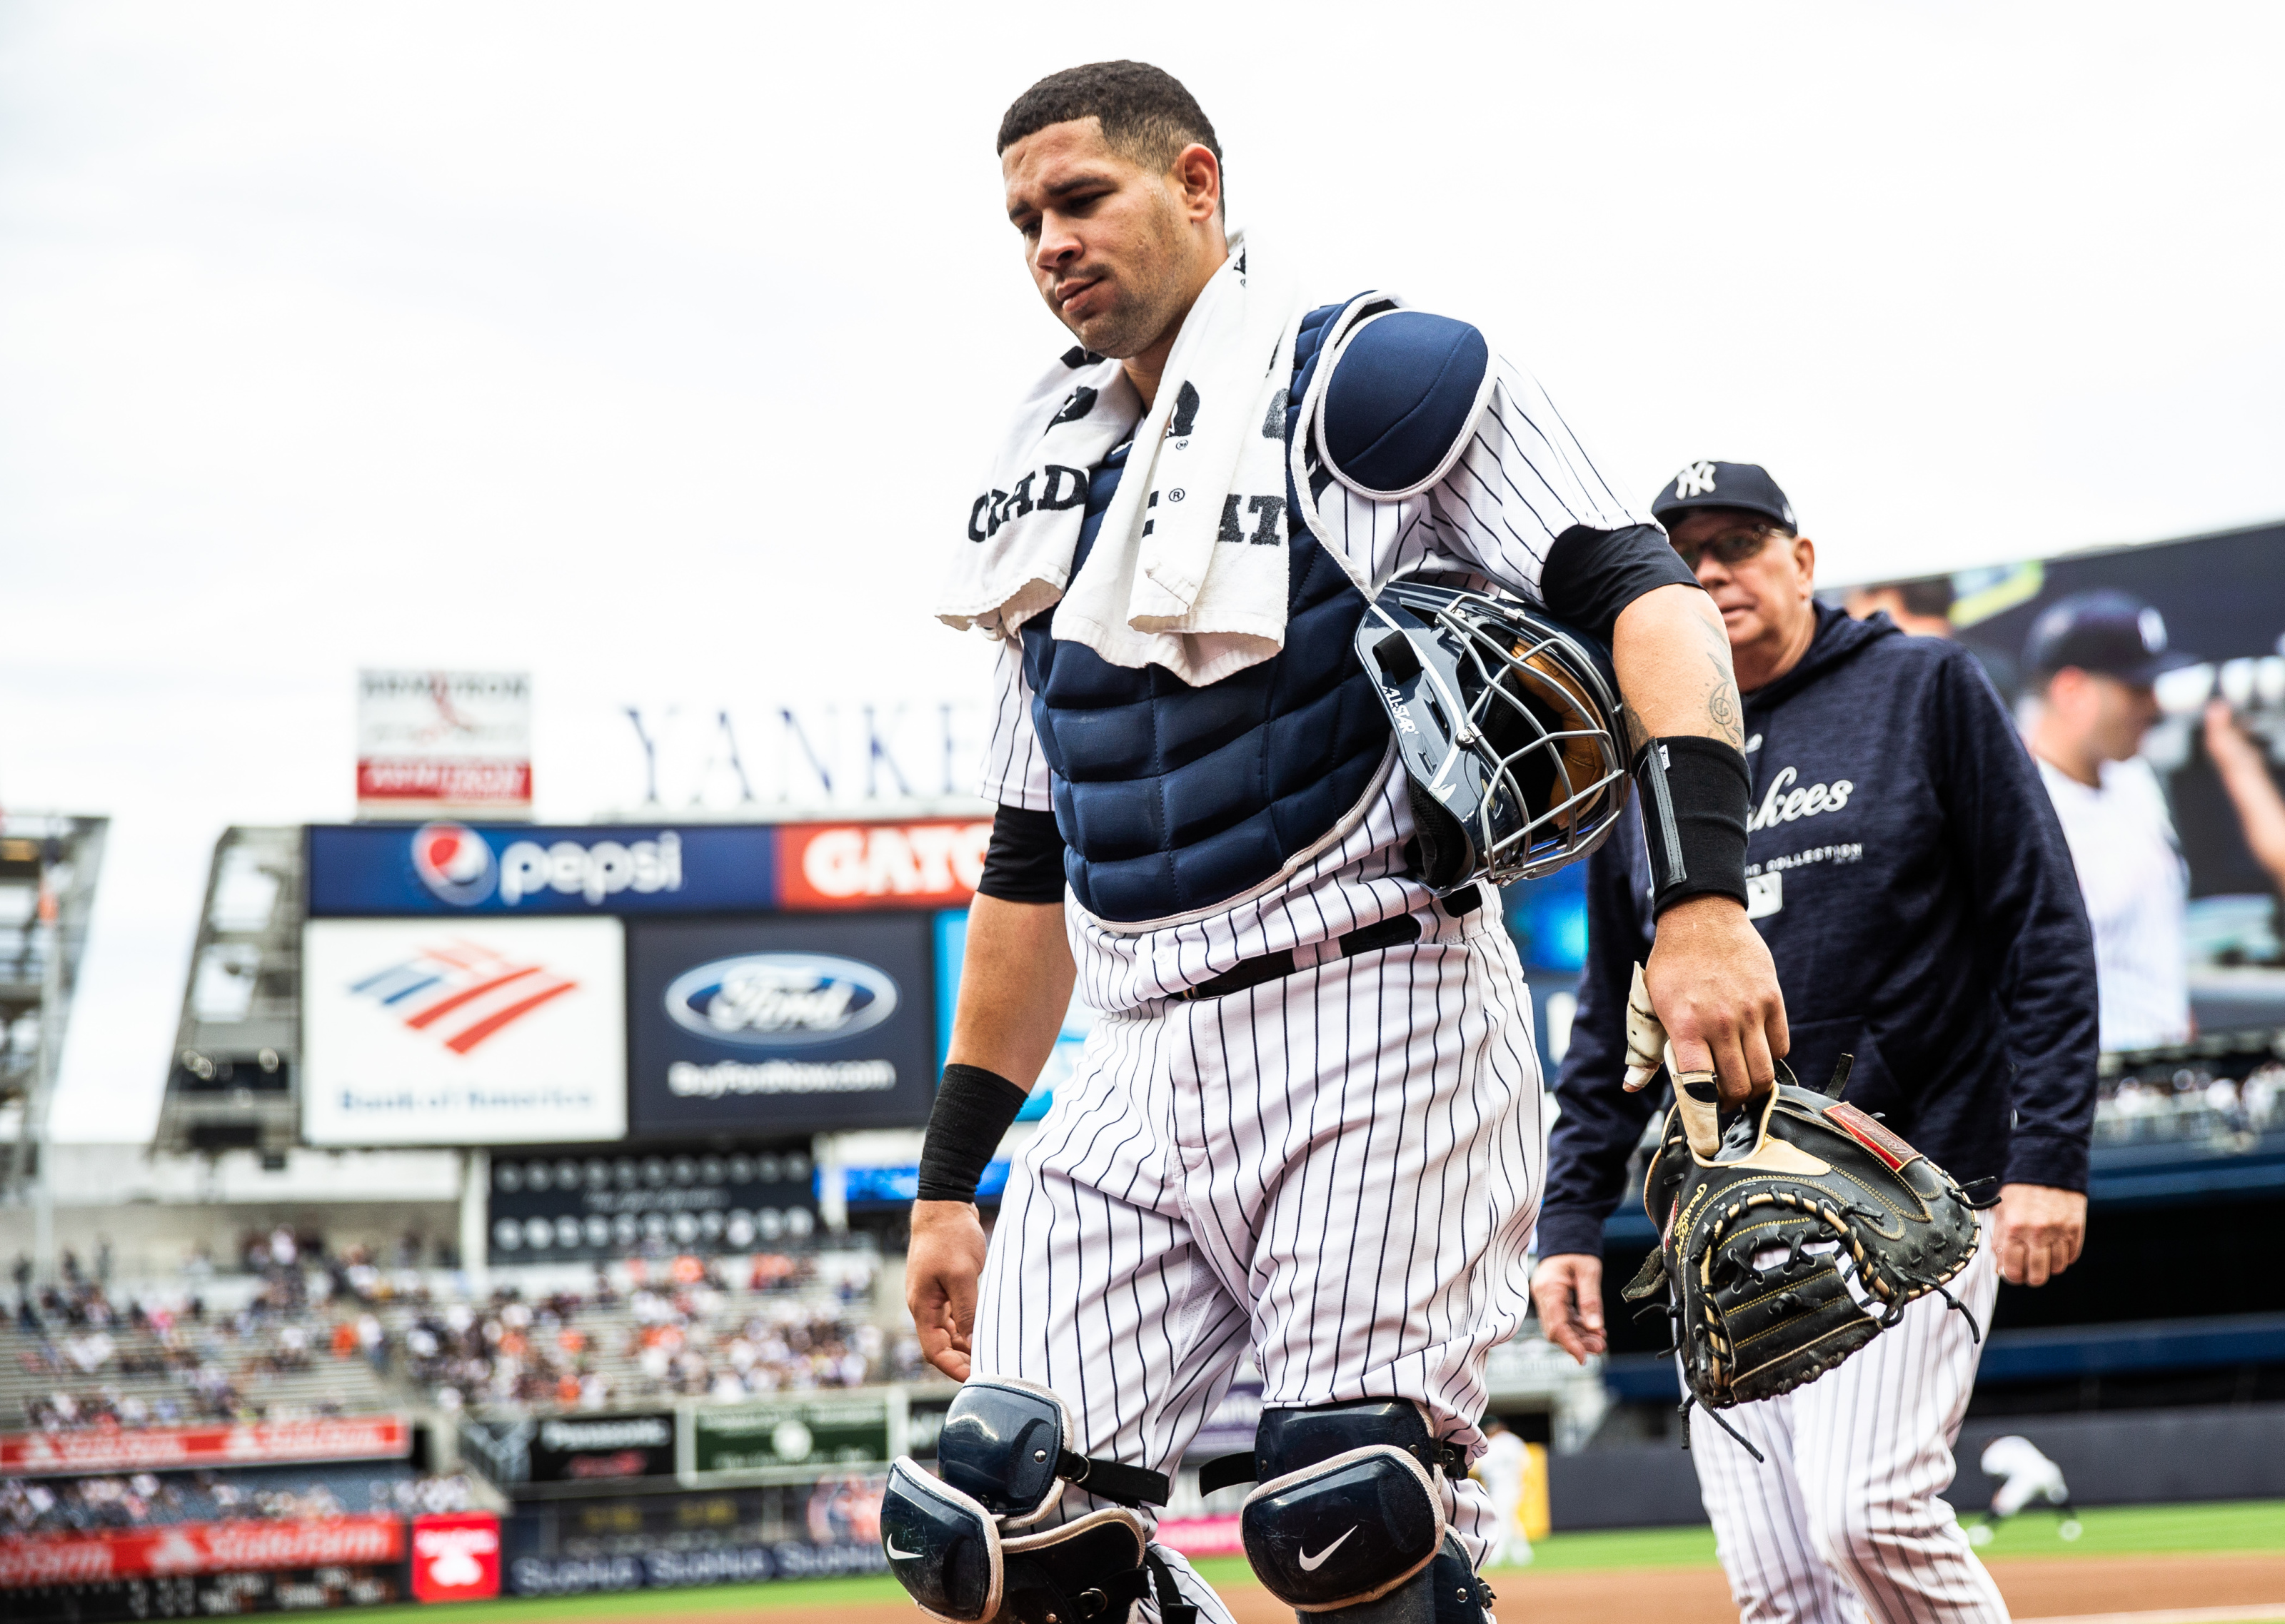 What does Gary Sanchez's future as the Yankees catcher look like